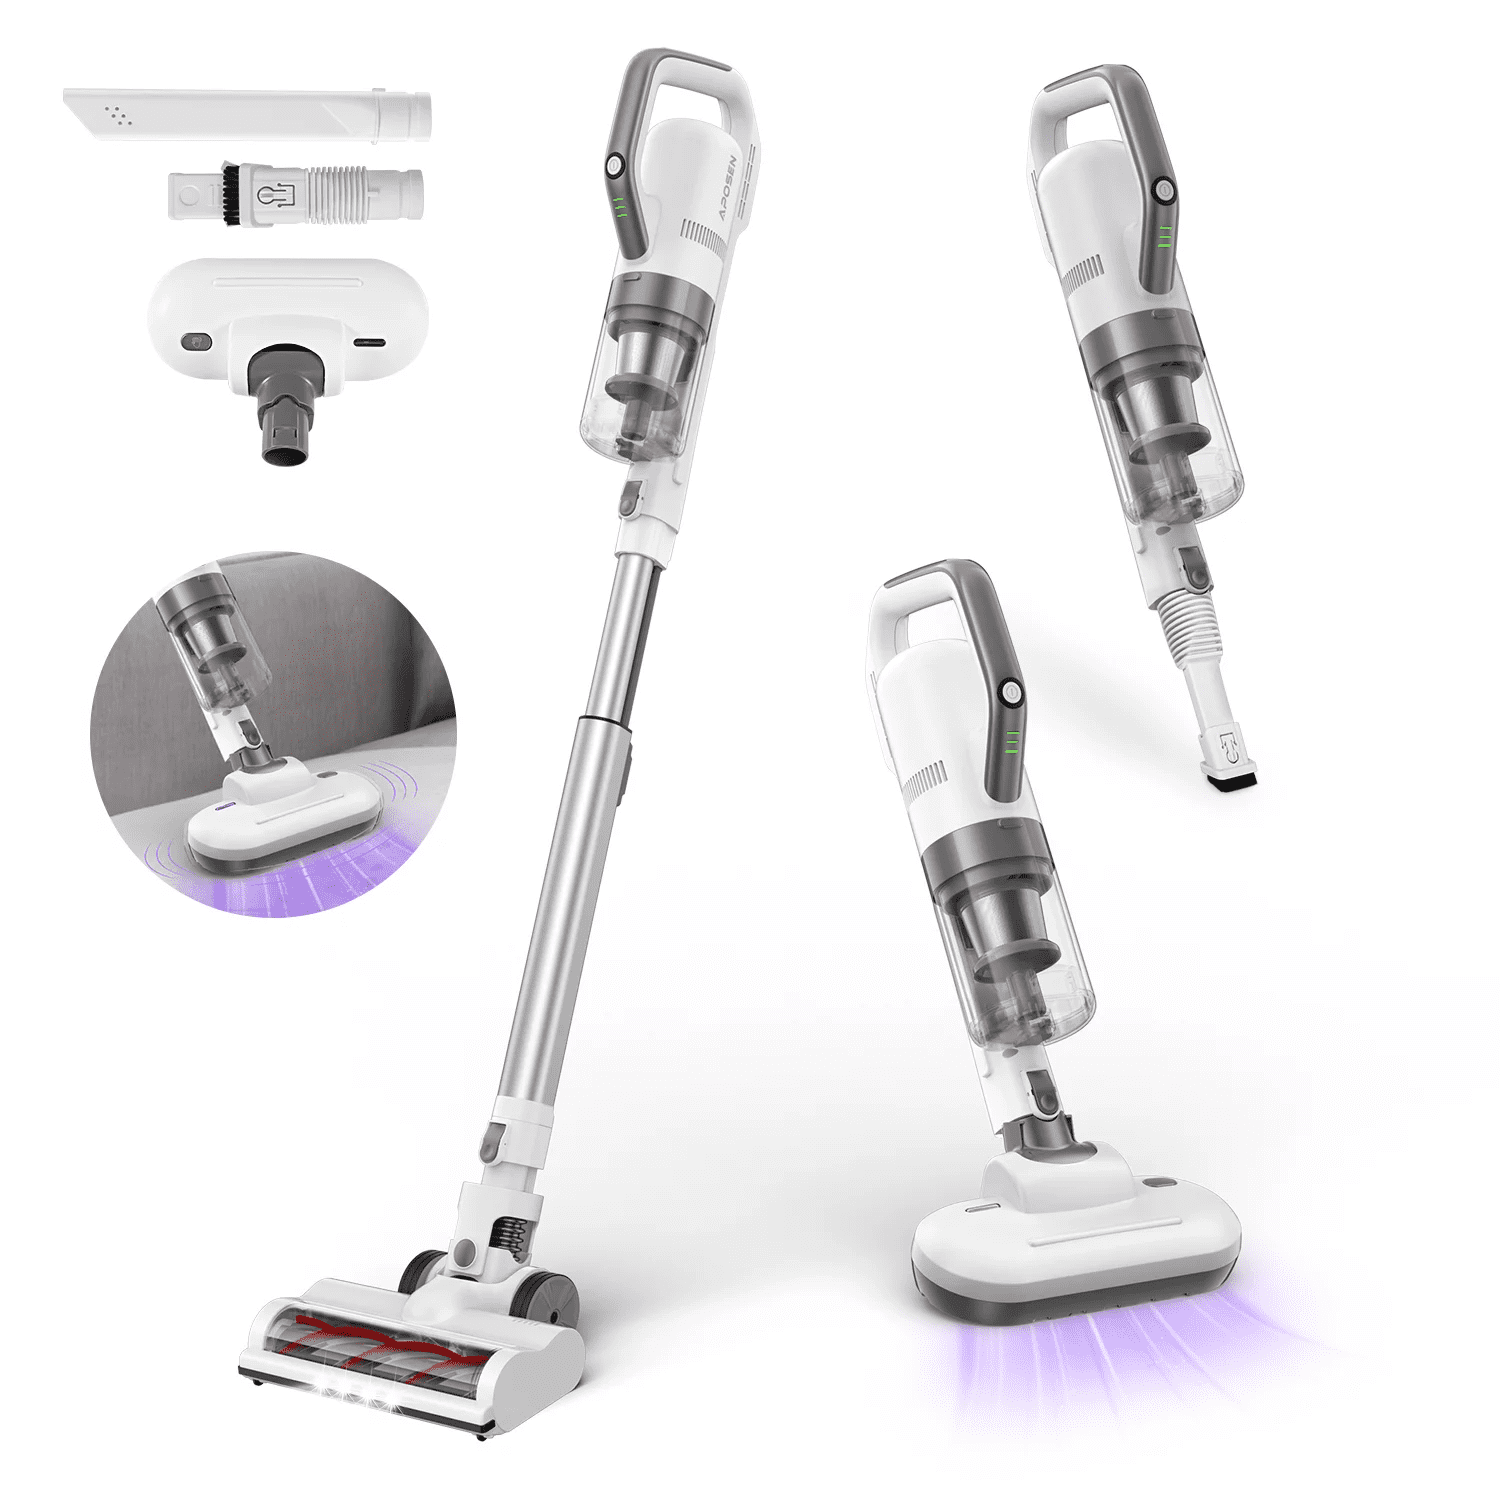 Aposen Cordless Vacuum 4-in-1 Lightweight Stick Vacuum Cleaner with Mite Remover for Bed Sofa Carpet Hard Floors H22S - image 1 of 9